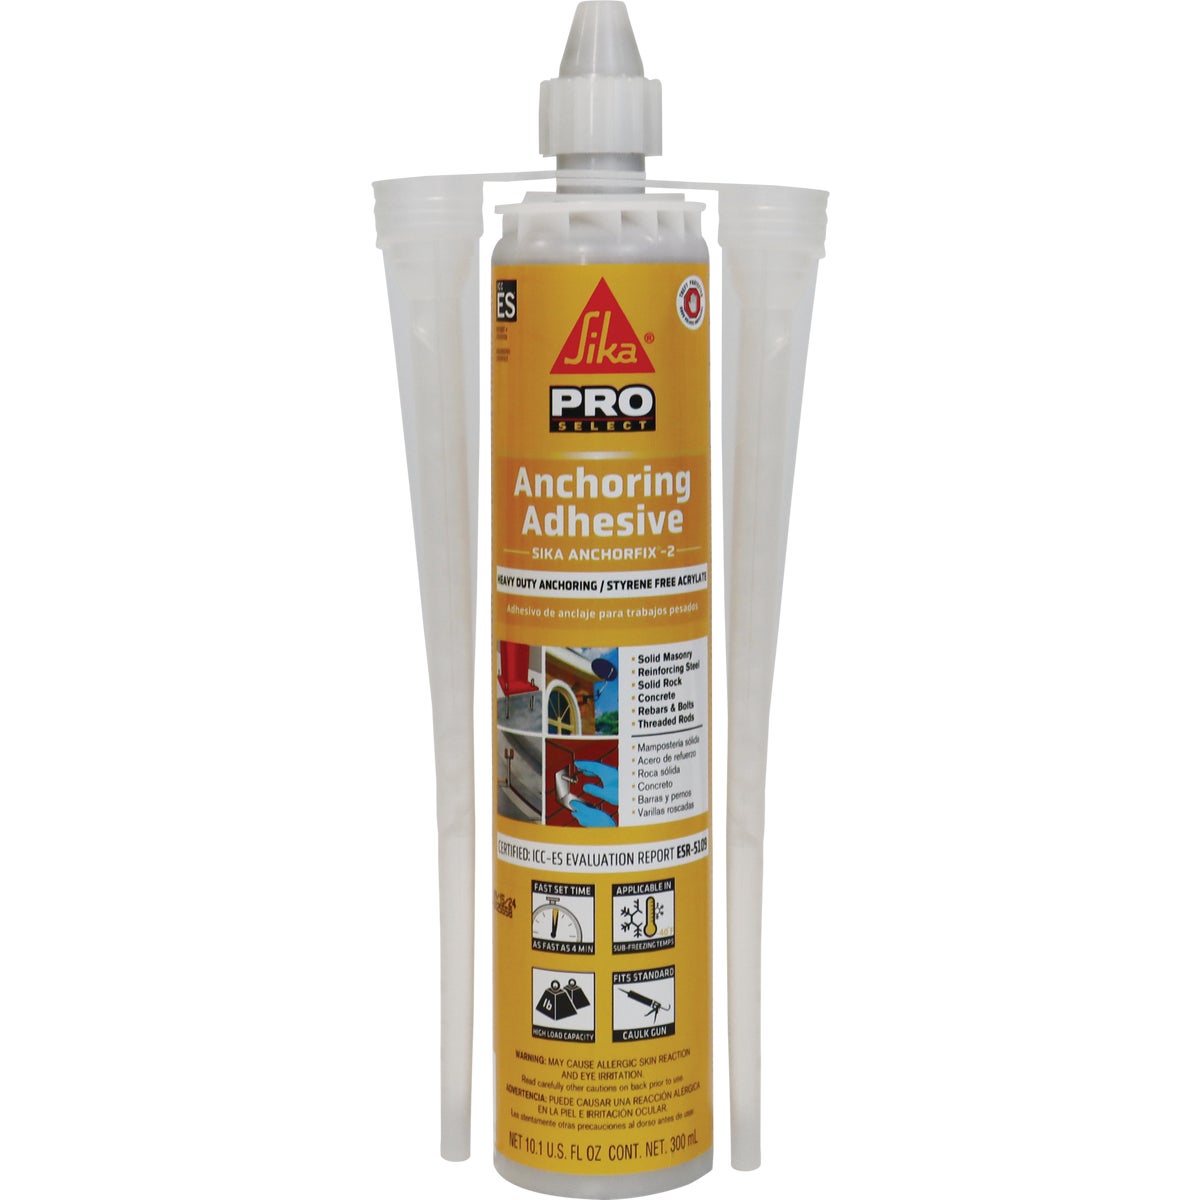 Item 272172, Sika AnchorFix-2 is a fast curing, high performance anchoring adhesive.